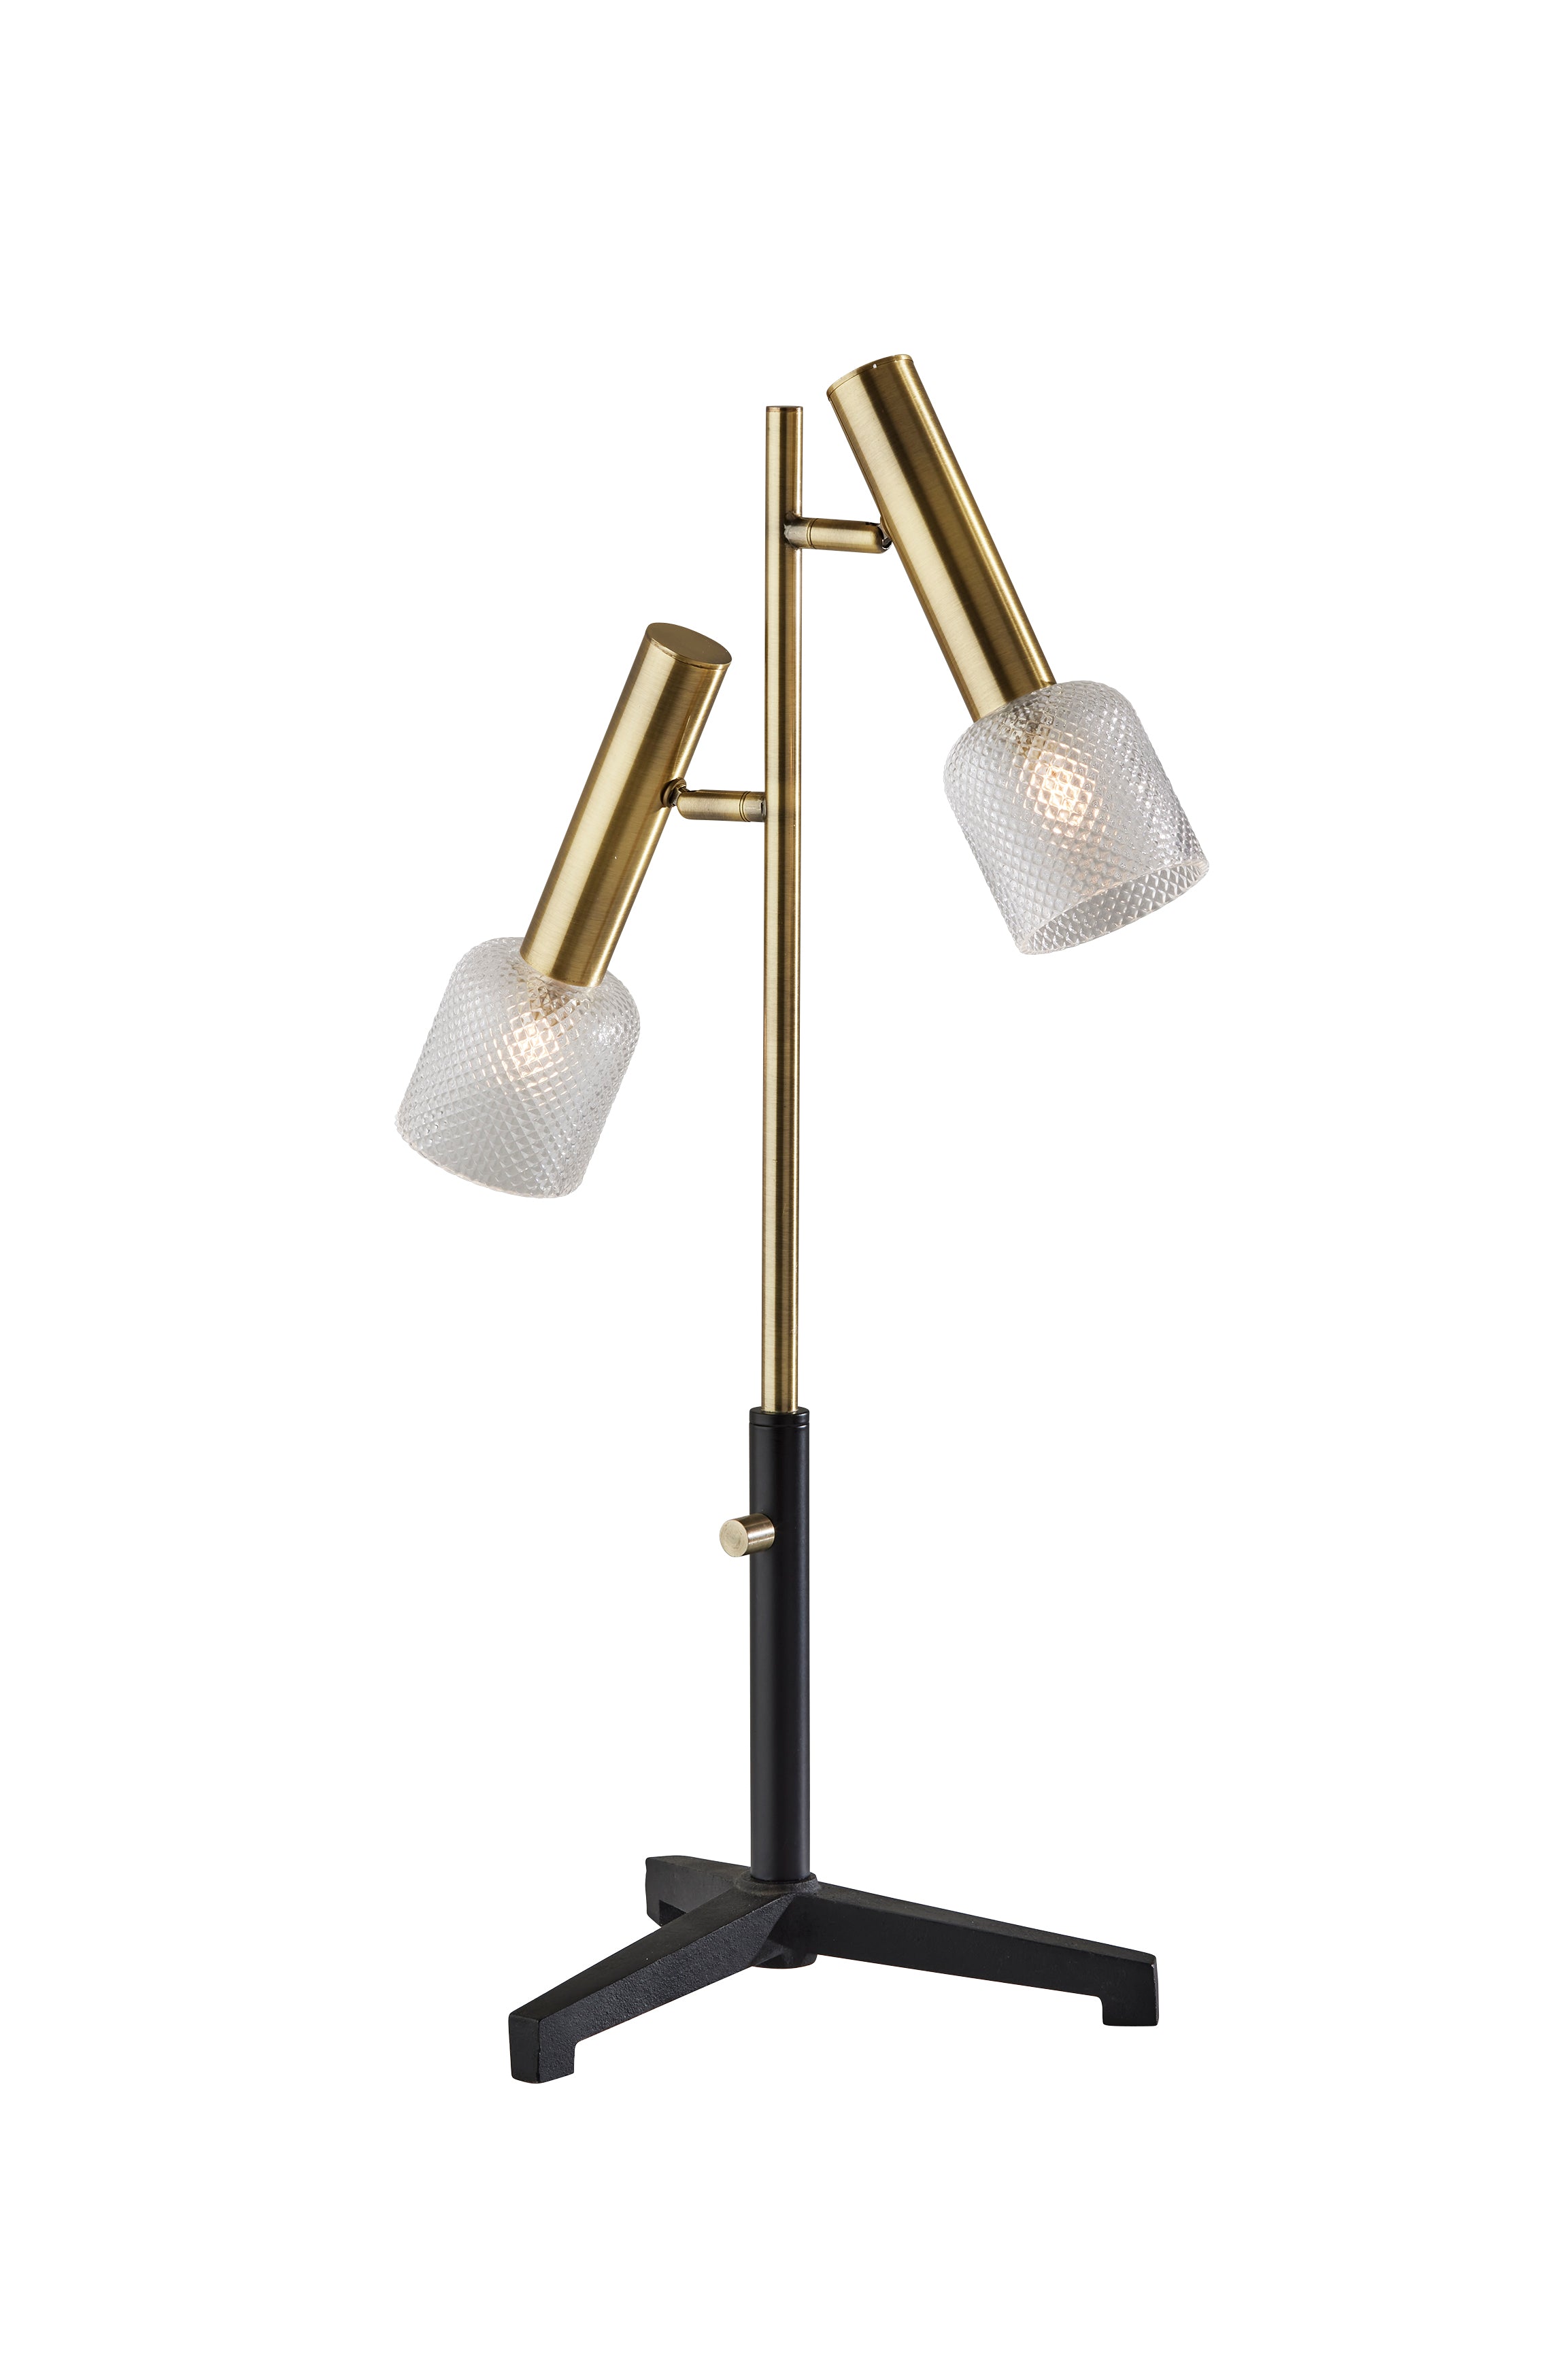 MELVIN Table lamp Black, Gold - 3551-21 | ADESSO